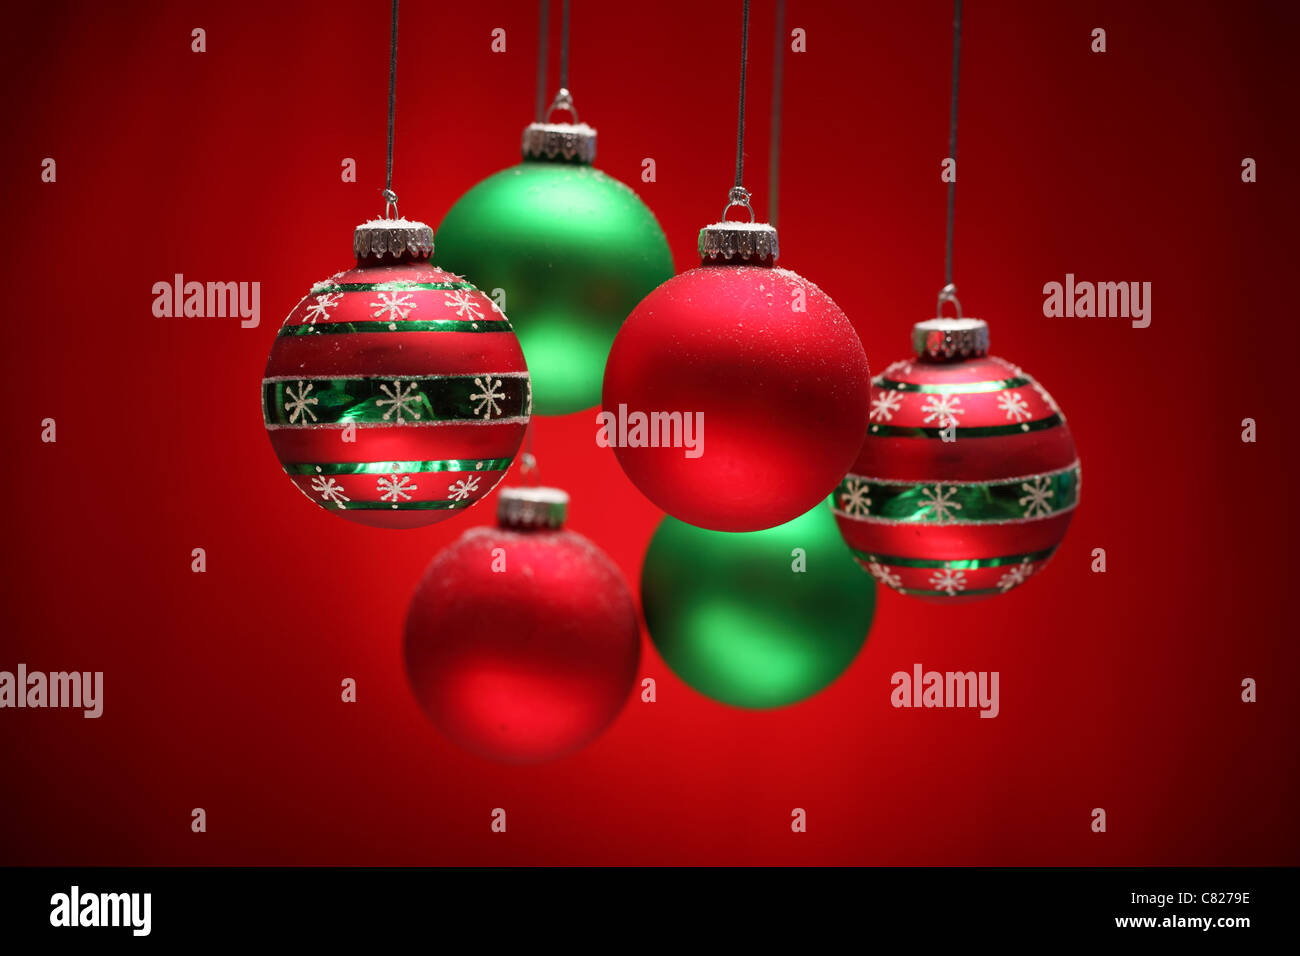 Group of red and green Christmas balls hanging over red background. Stock Photo